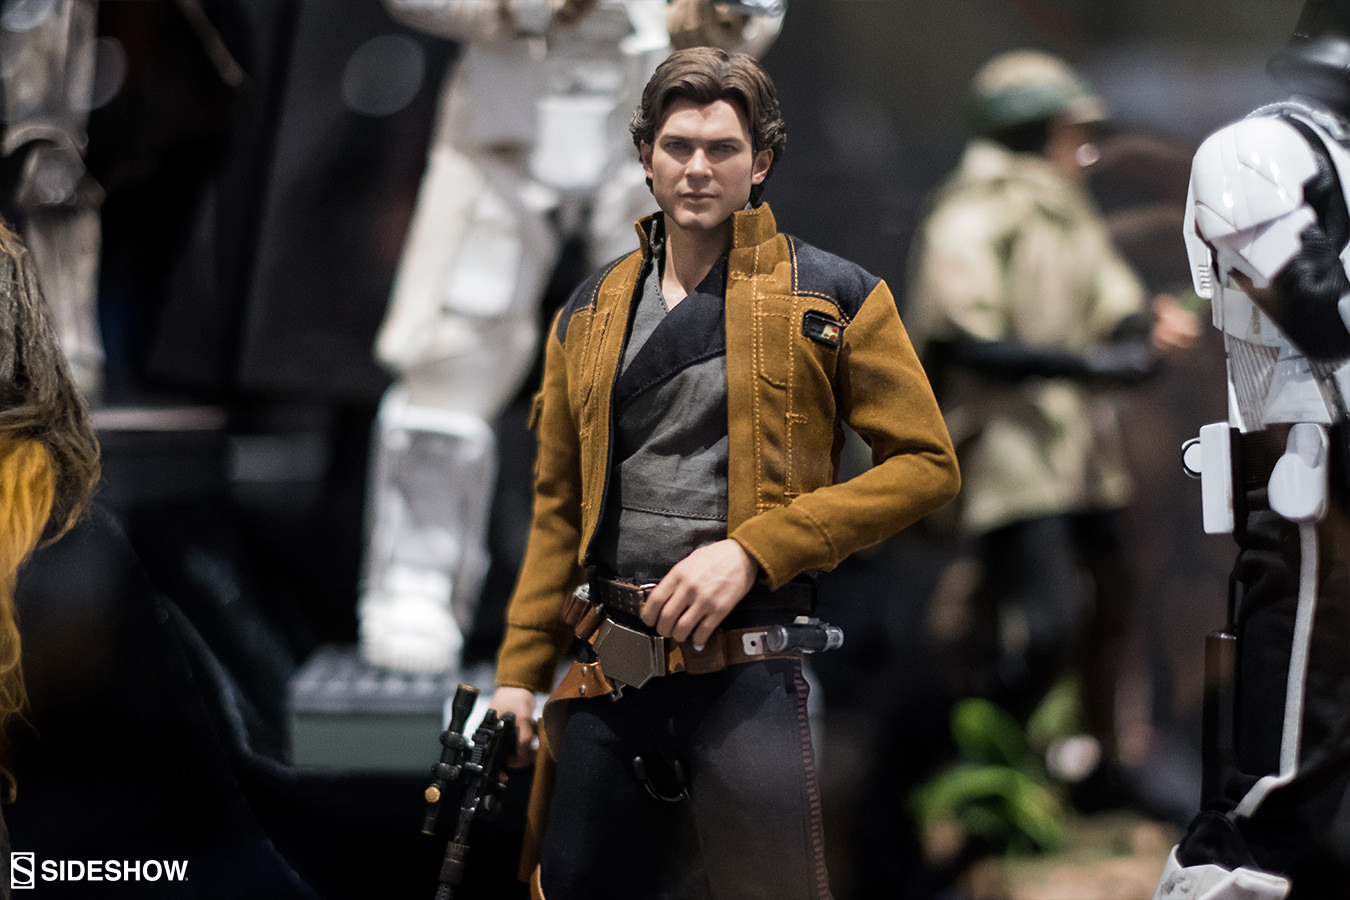 Hot Toys Star Wars SDCC 2018 Sixth Scale Figure